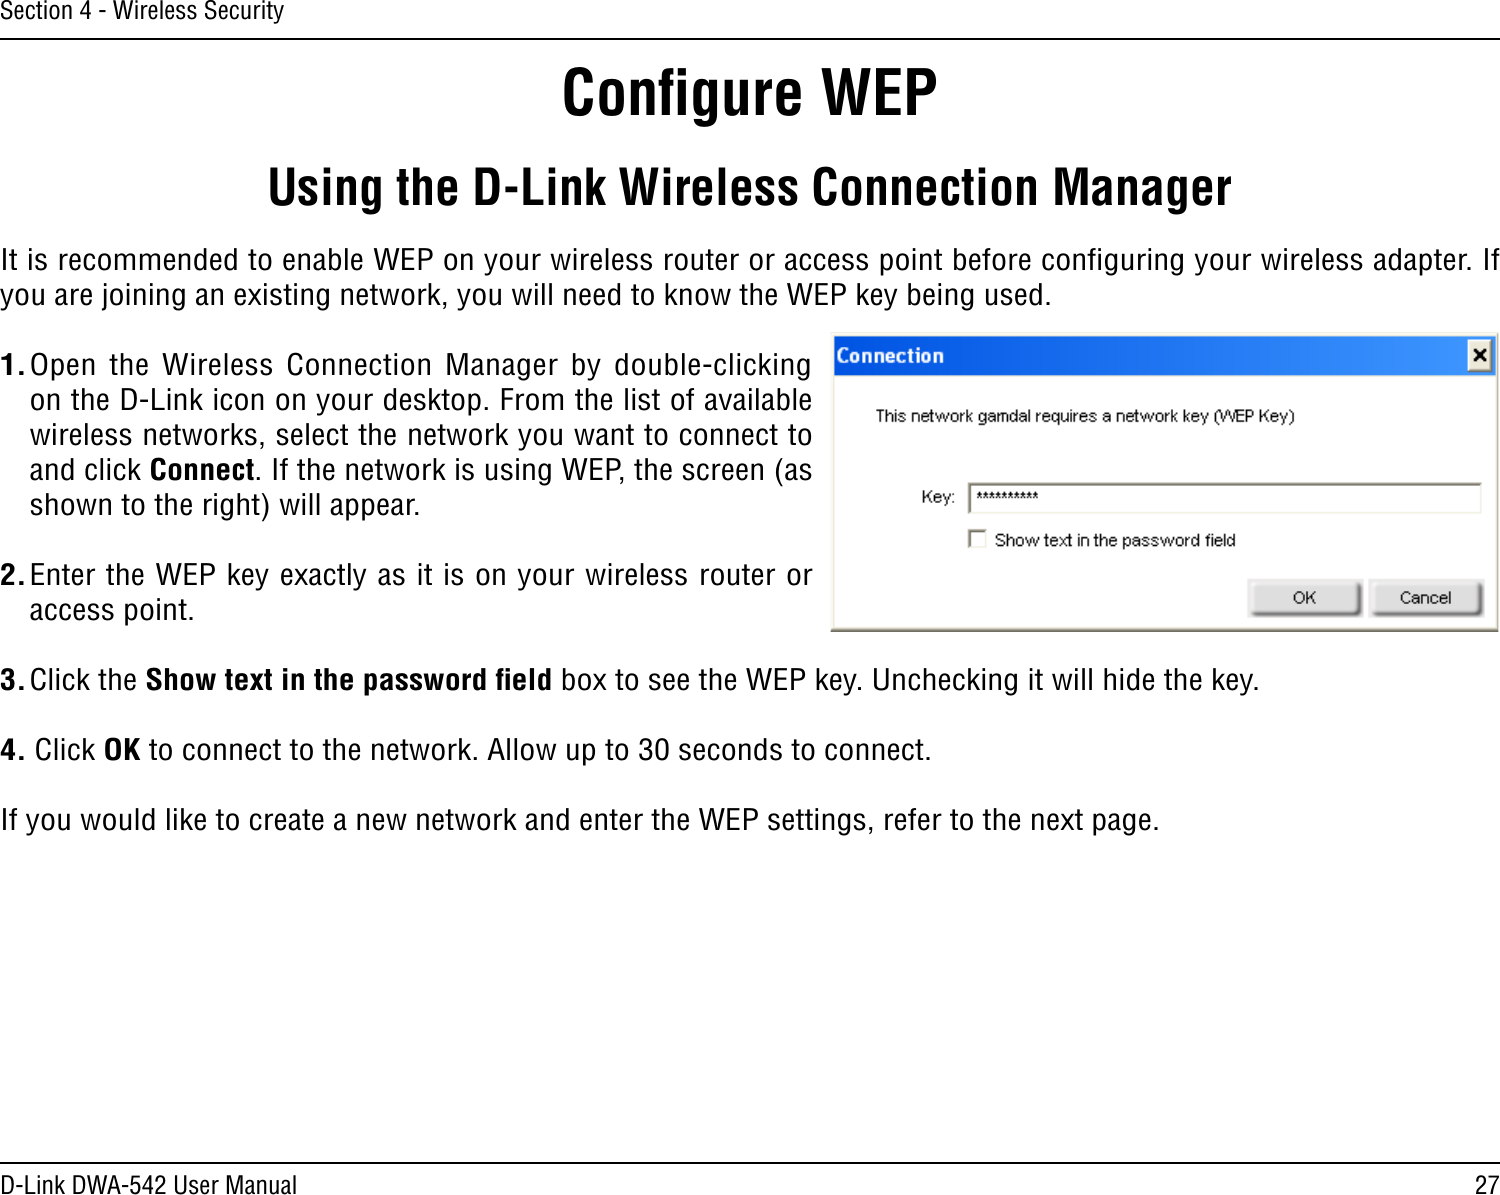 27D-Link DWA-542 User ManualSection 4 - Wireless SecurityConﬁgure WEPUsing the D-Link Wireless Connection ManagerIt is recommended to enable WEP on your wireless router or access point before conﬁguring your wireless adapter. If you are joining an existing network, you will need to know the WEP key being used.1. Open  the  Wireless Connection Manager  by  double-clicking on the D-Link icon on your desktop. From the list of available wireless networks, select the network you want to connect to and click Connect. If the network is using WEP, the screen (as shown to the right) will appear. 2. Enter the WEP key exactly as it is on your wireless router or access point.3. Click the Show text in the password ﬁeld box to see the WEP key. Unchecking it will hide the key.4. Click OK to connect to the network. Allow up to 30 seconds to connect.If you would like to create a new network and enter the WEP settings, refer to the next page.